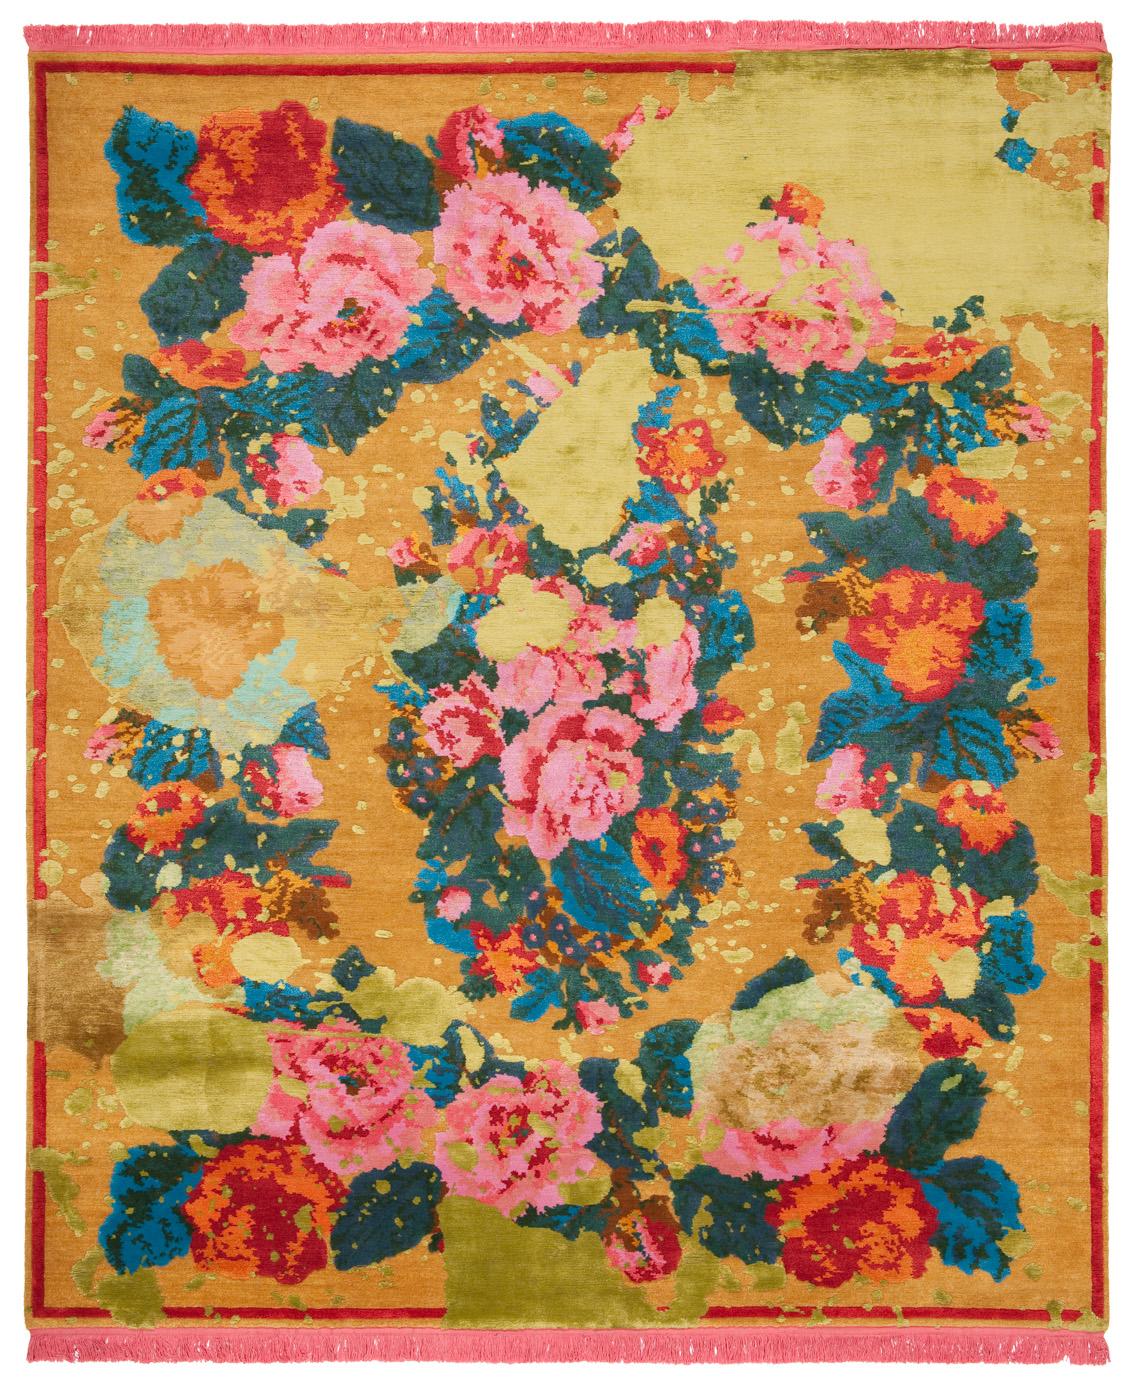 Designed by Jan Kath, this hand-knotted rug is from a collection inspired by carpets made in Karabakh and other provinces in southern Russia around 1900. The patterns are created using rich, bright colors of Tibetan highland wool and Chinese silk,